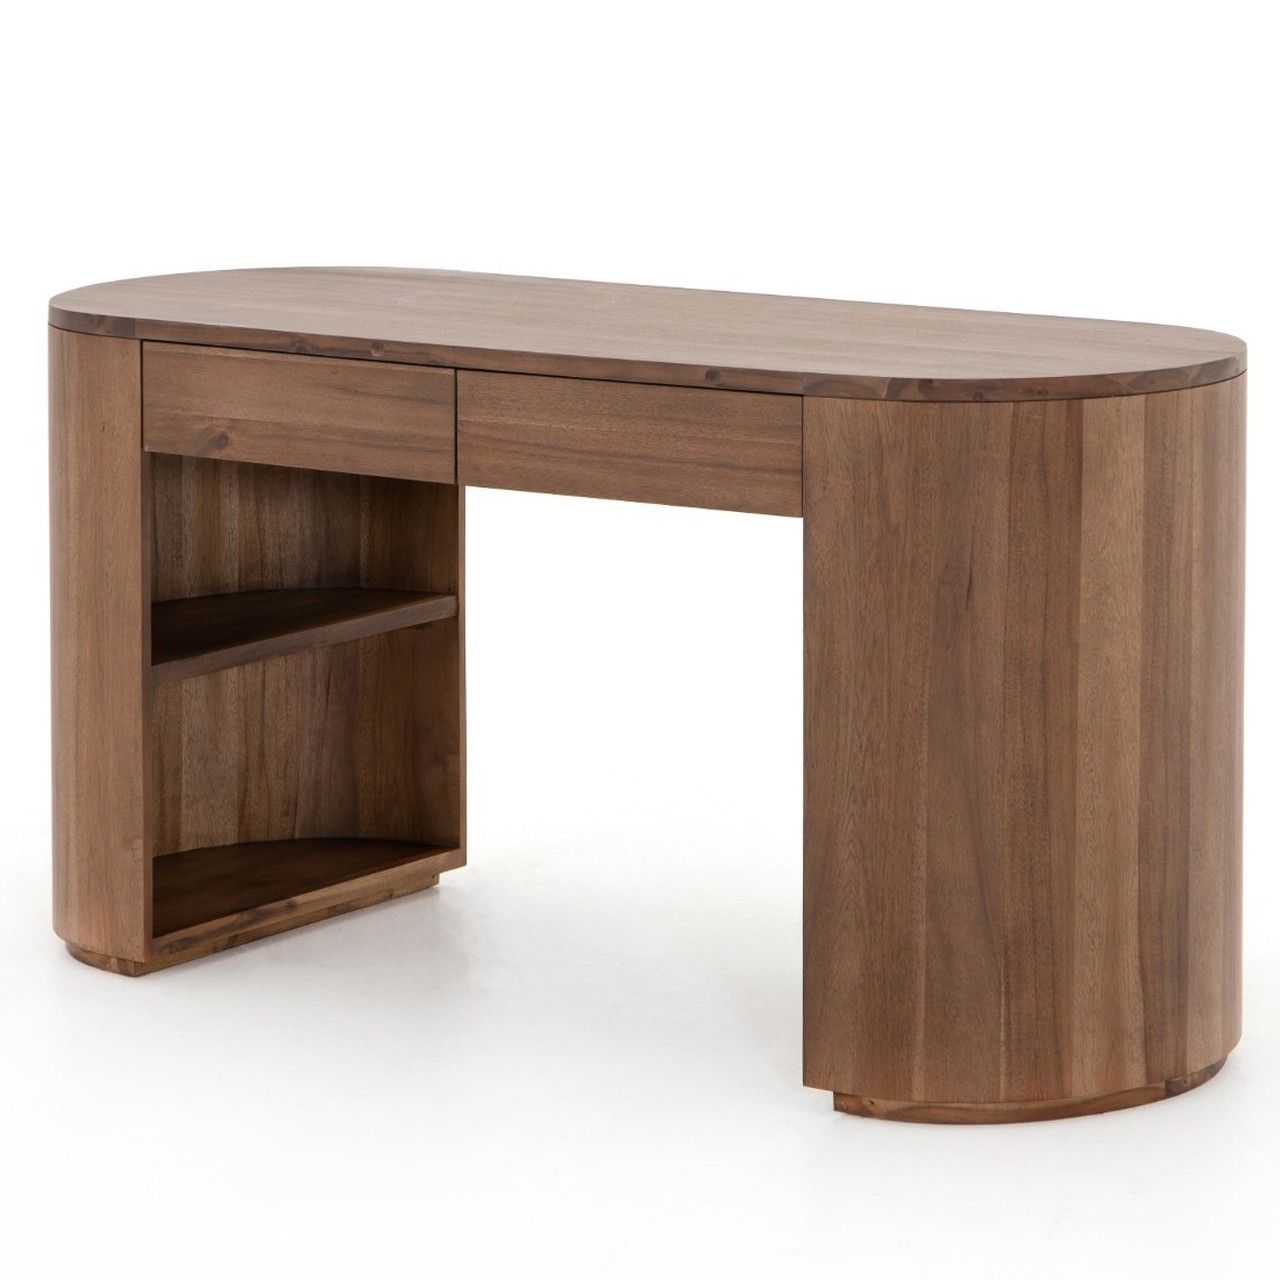 Pilar Wooden Oval Writing Desk With Drawers 60" In 2021 | Desk With Inside Rustic Acacia Wooden Writing Desks (View 12 of 15)